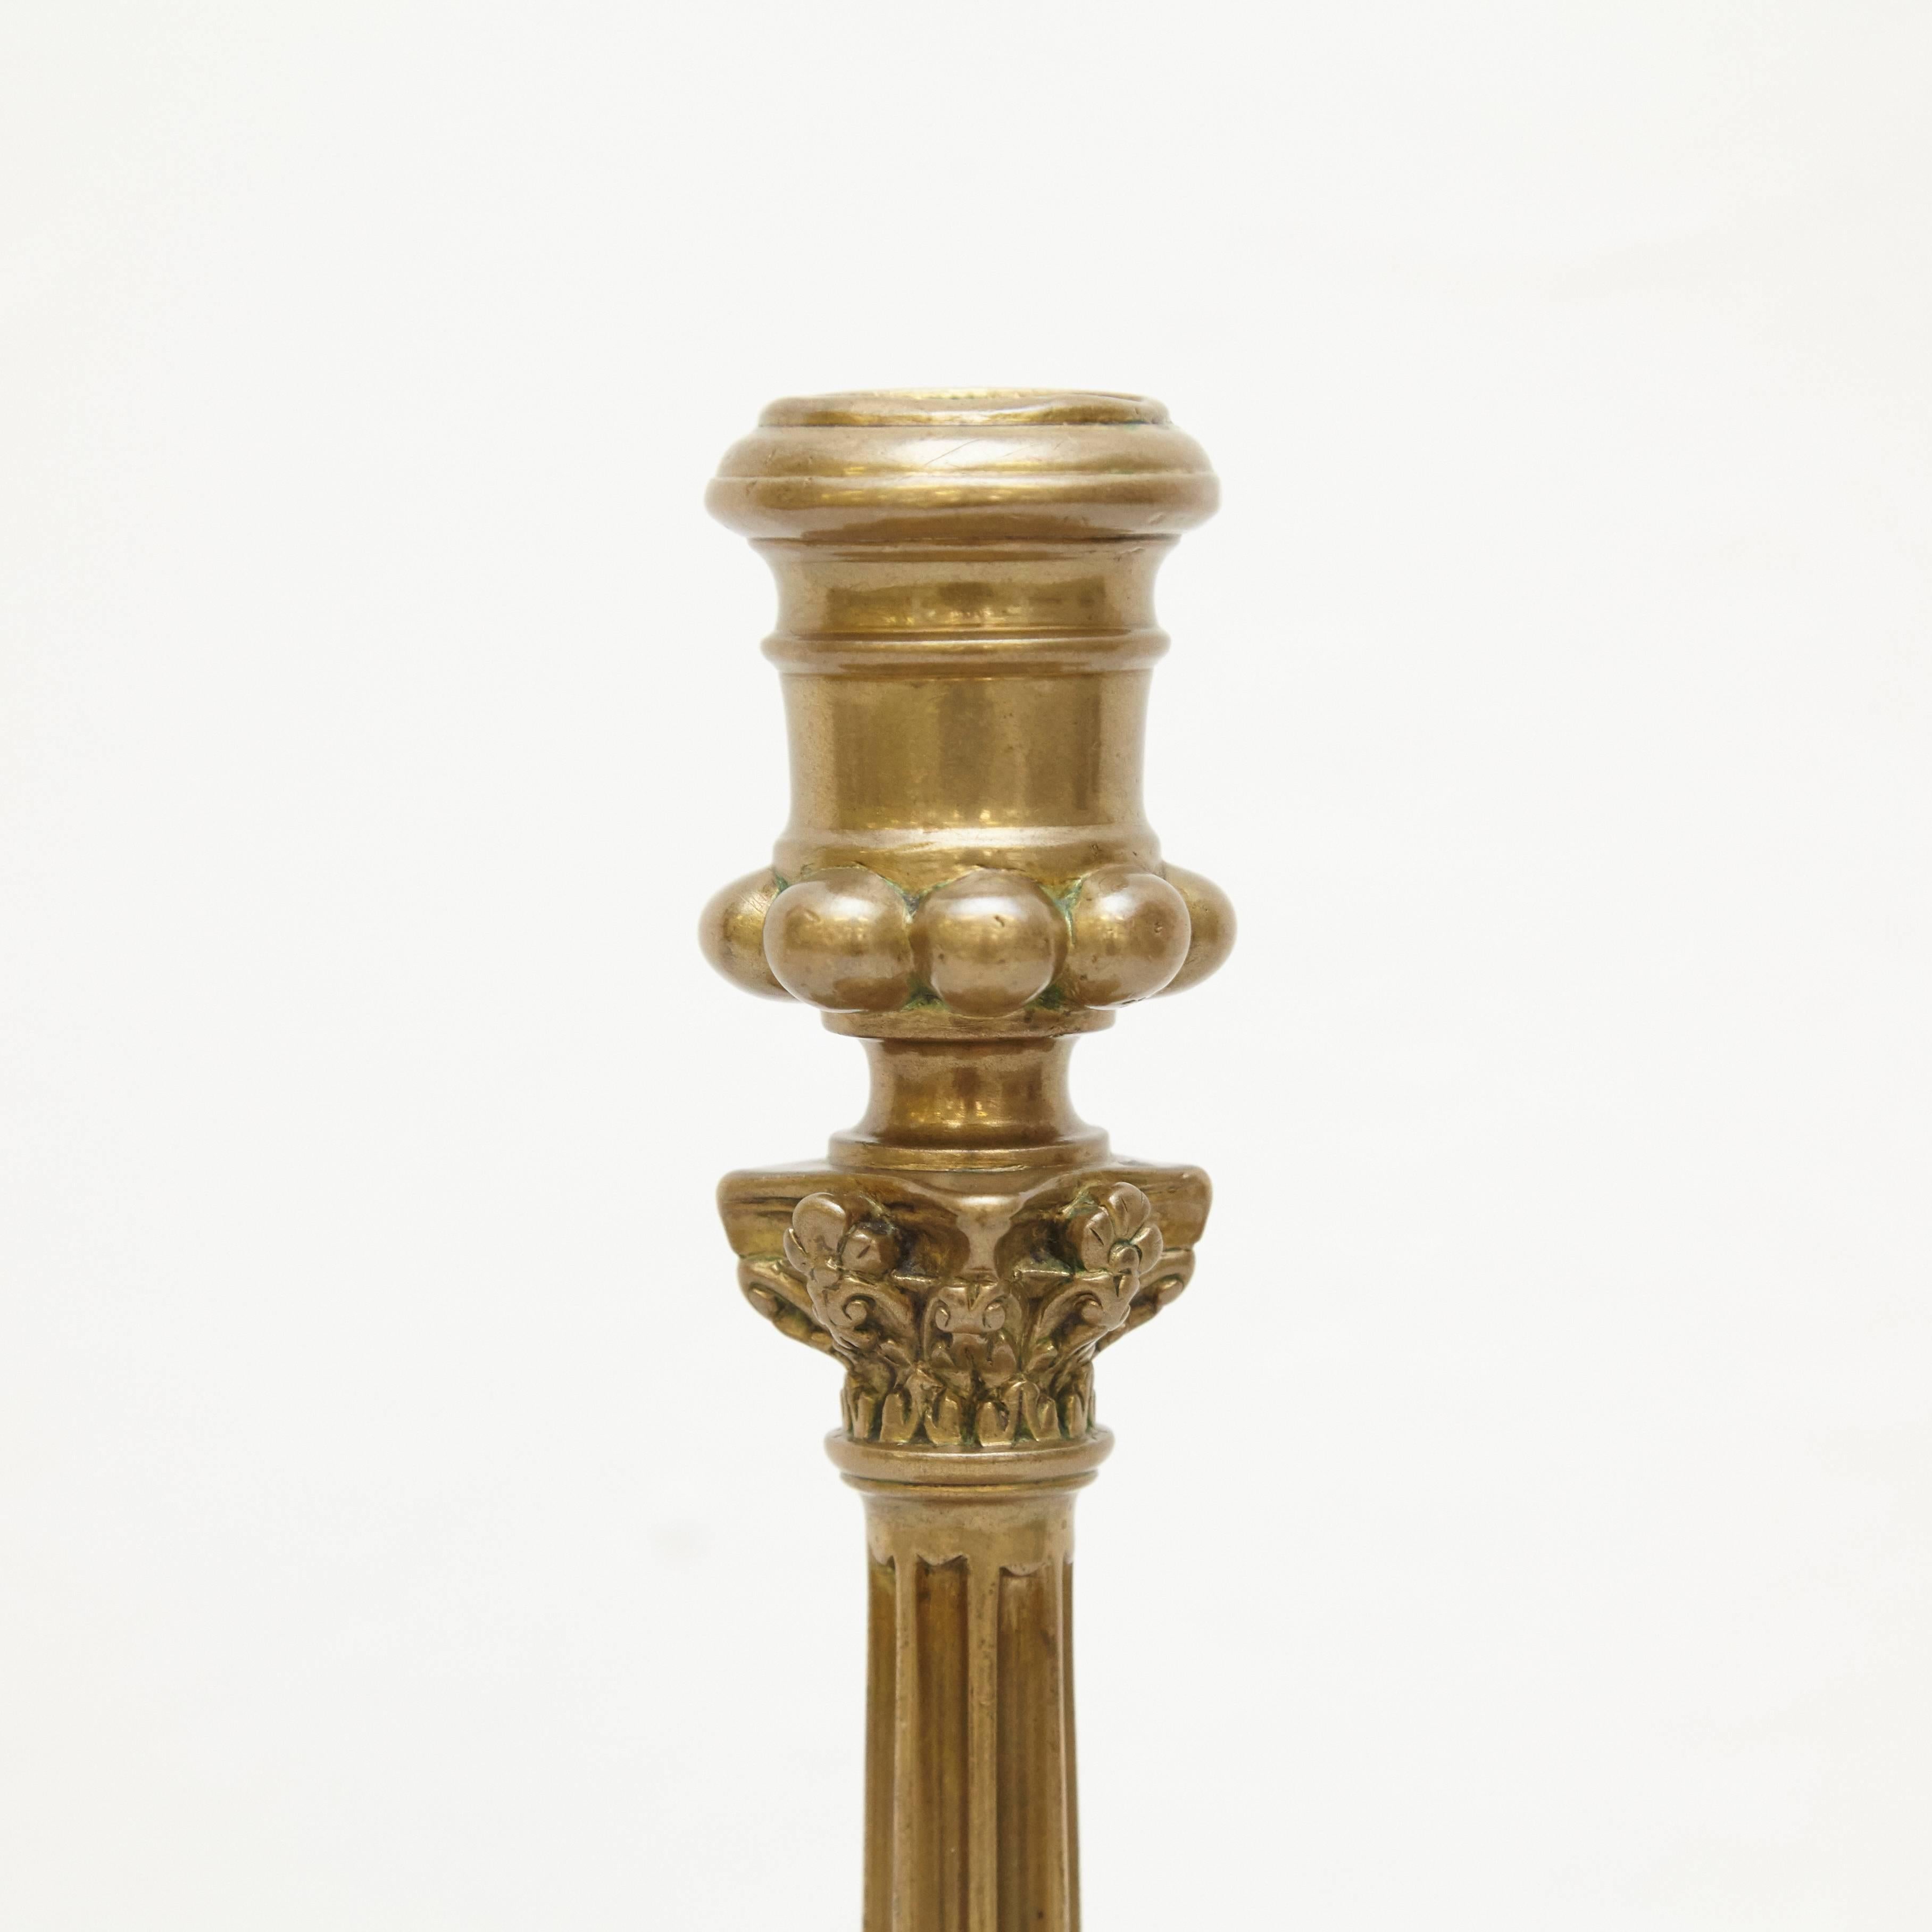 White bronze candlestick with fluted column and capital on a round base, circa 1590.

From the north of French - Flemish (the northern portion of Belgium).

In good original condition, with minor wear consistent with age and use, preserving a